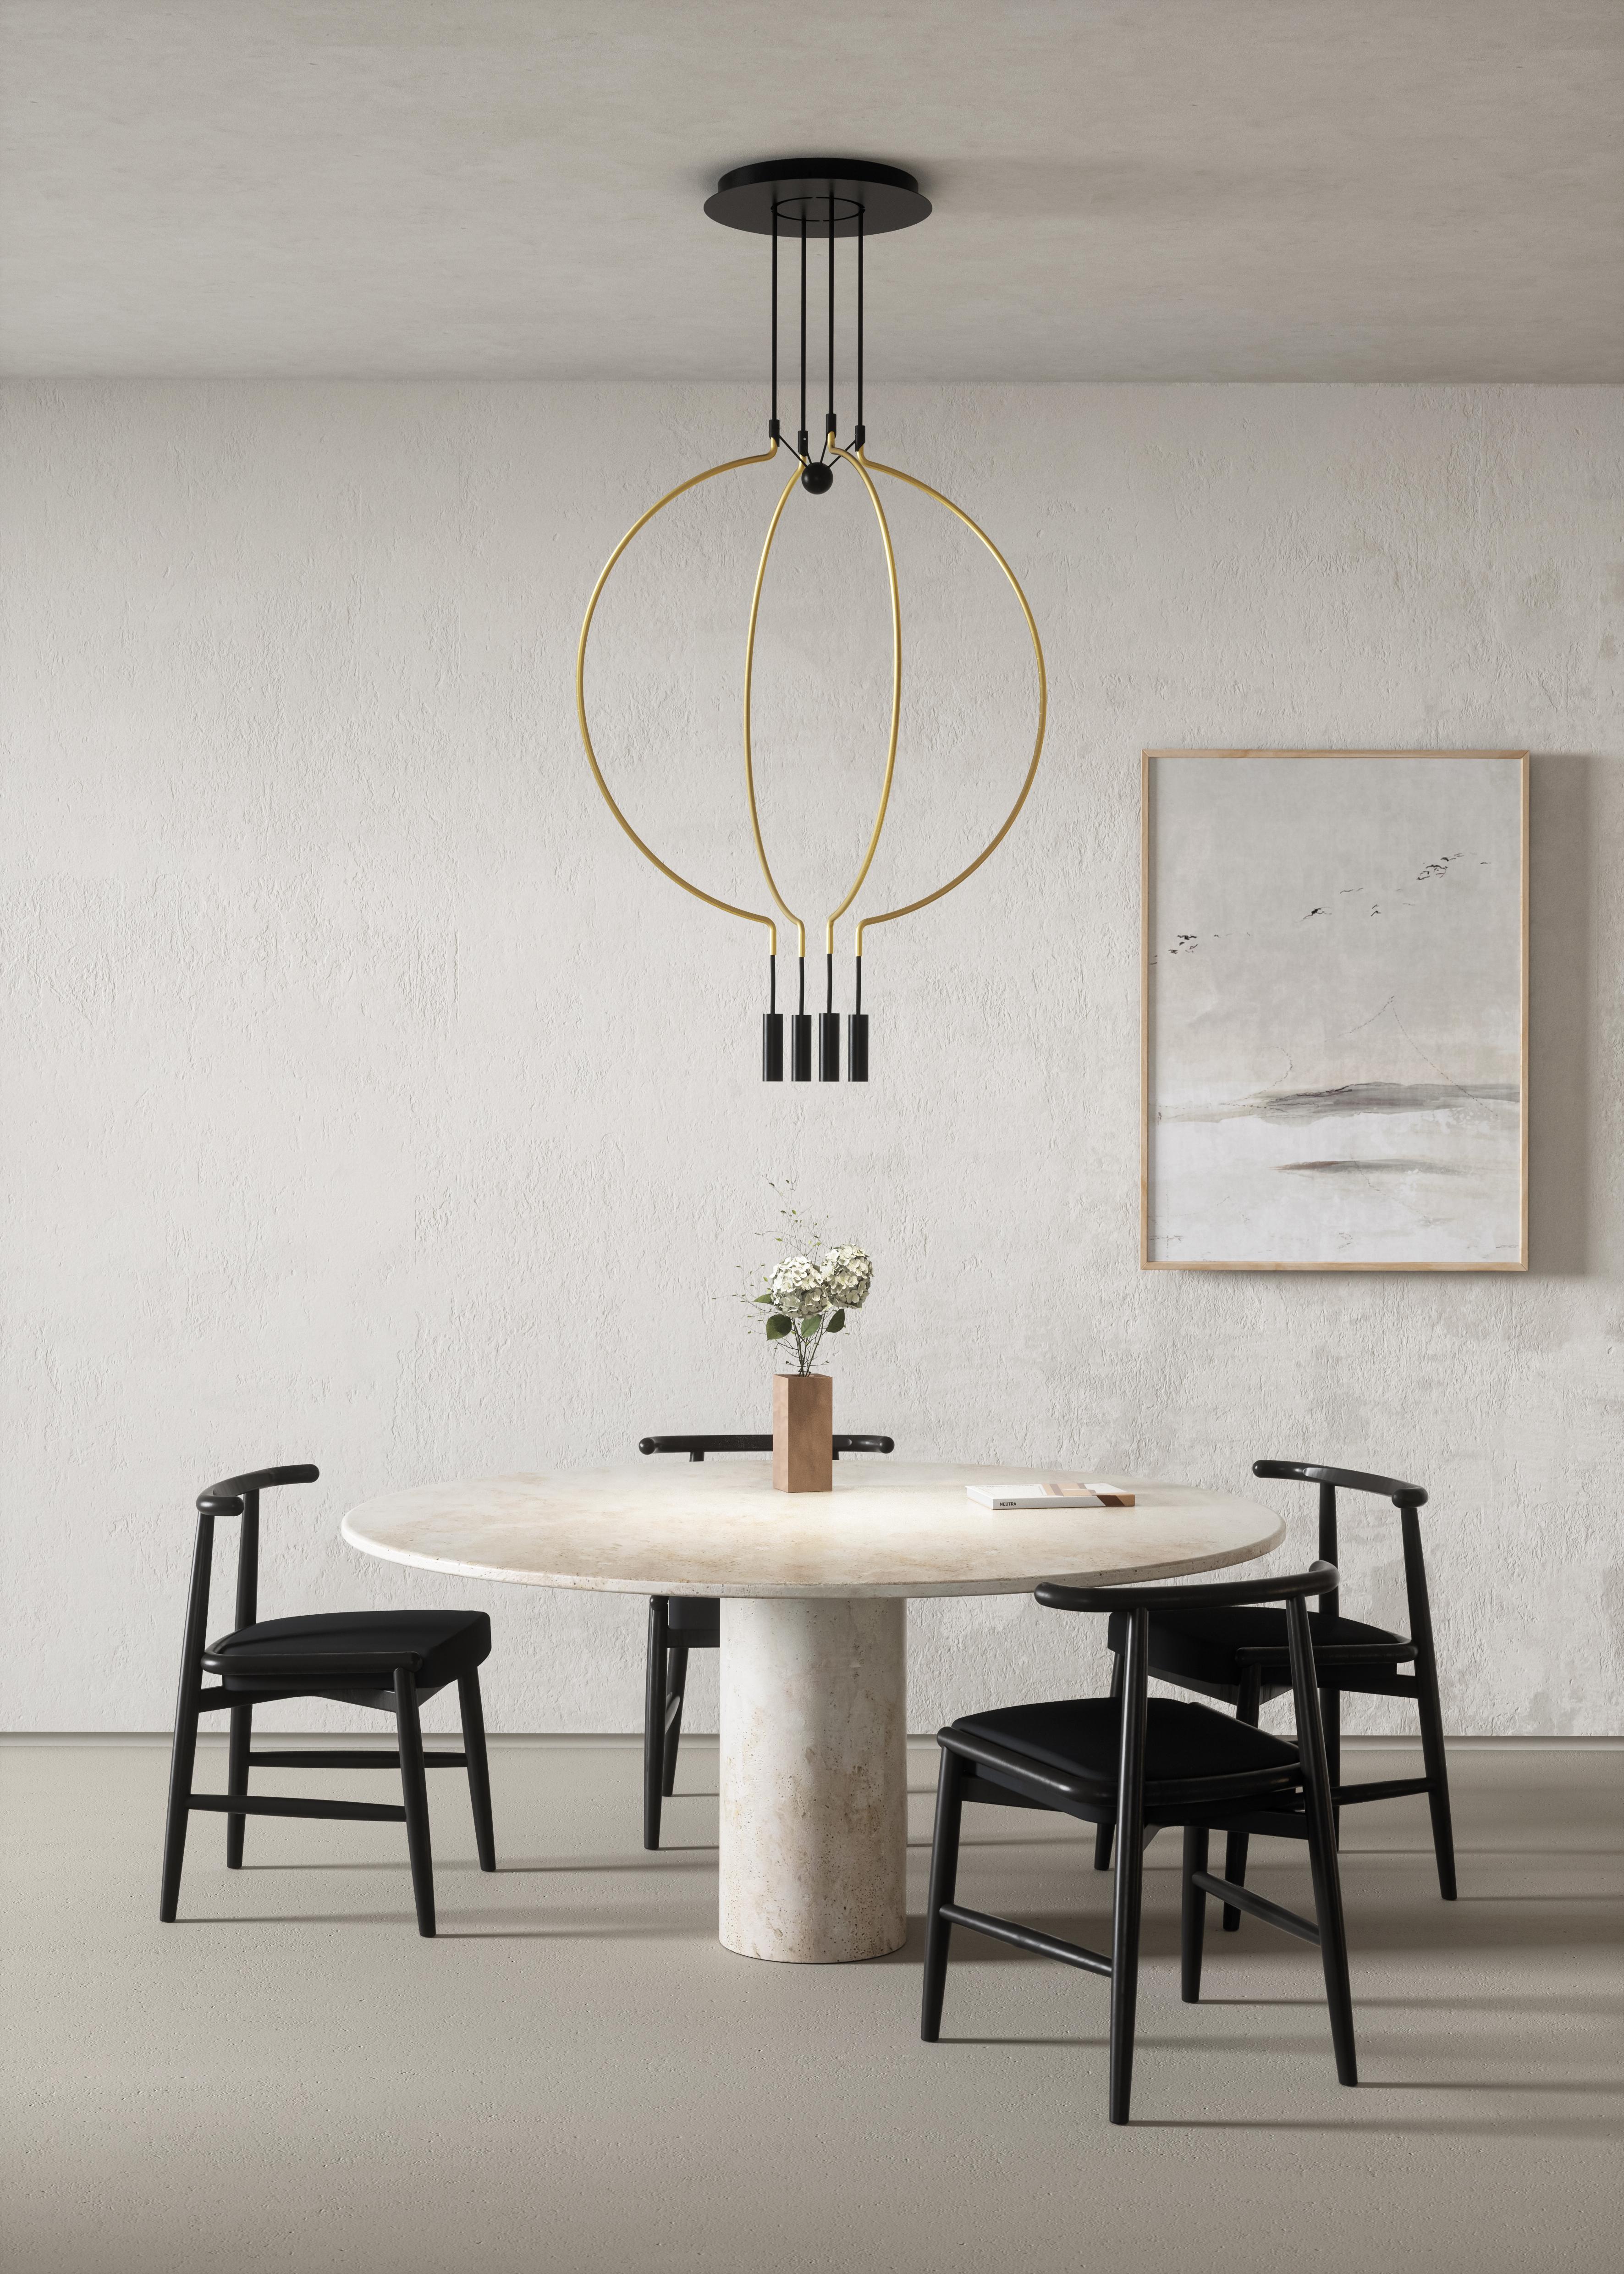 Axolight Liaison Model P2 Pendant Lamp in Black/Gold by Sara Moroni

Modular lightness and elegance. Liaison tells about the perfect balance of three geometric archetypes: sphere, circle and cylinder compose a system that includes the single pendant